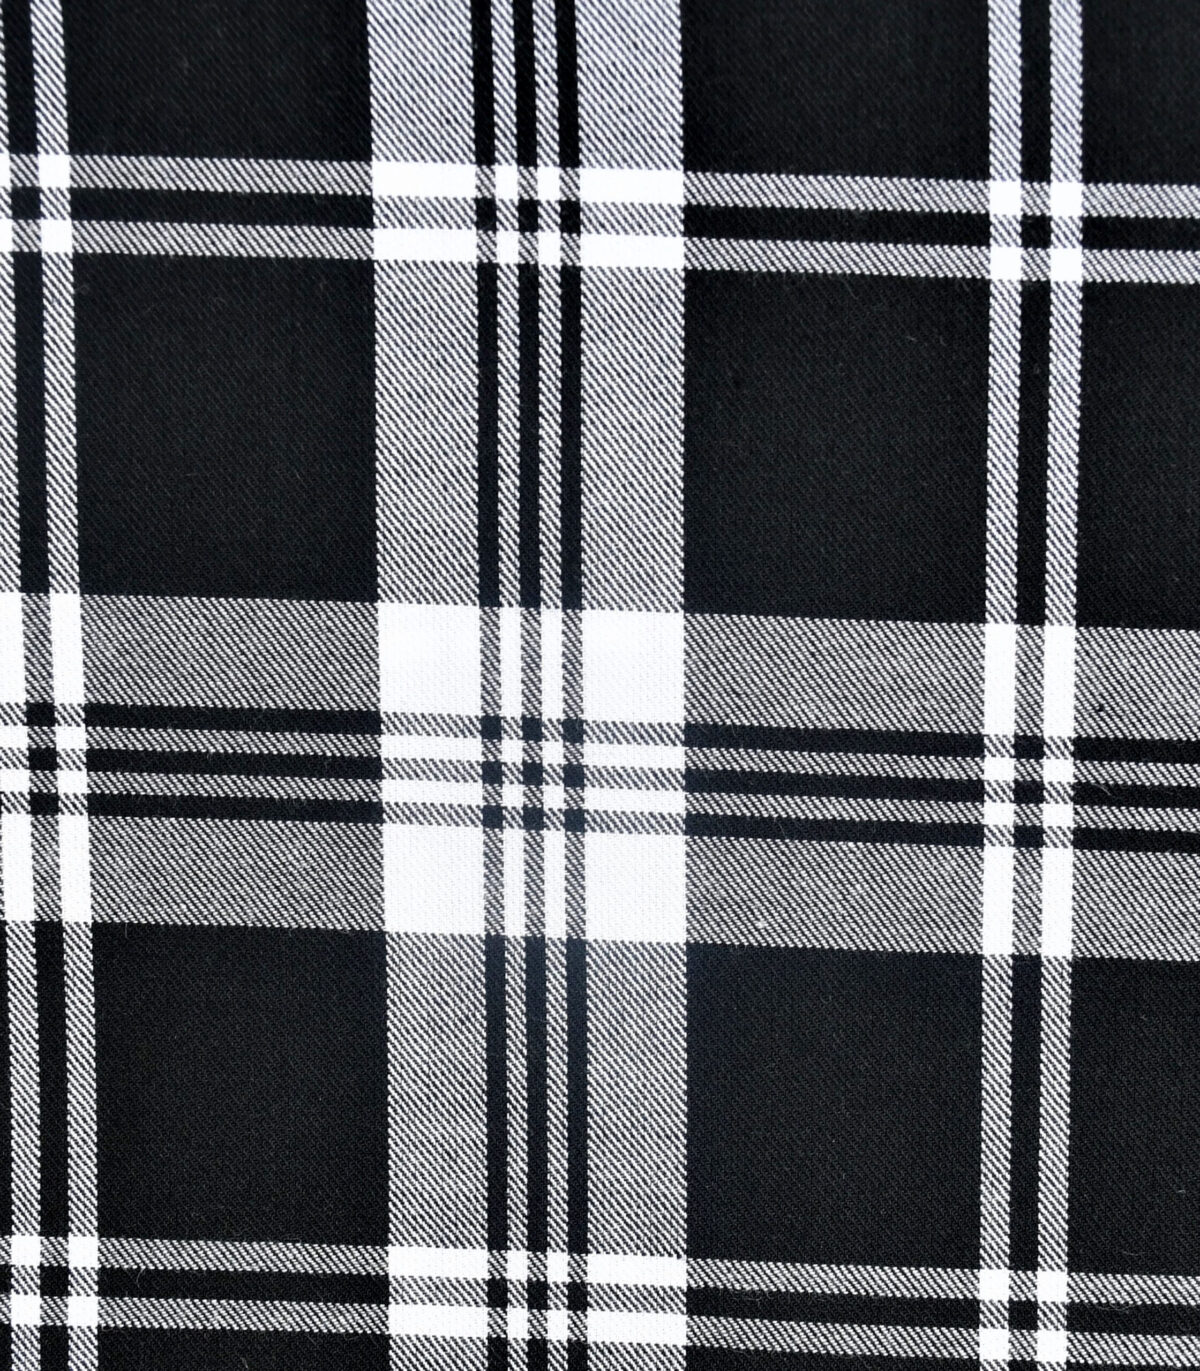 Black White Yarn Dyed Checked Fabric